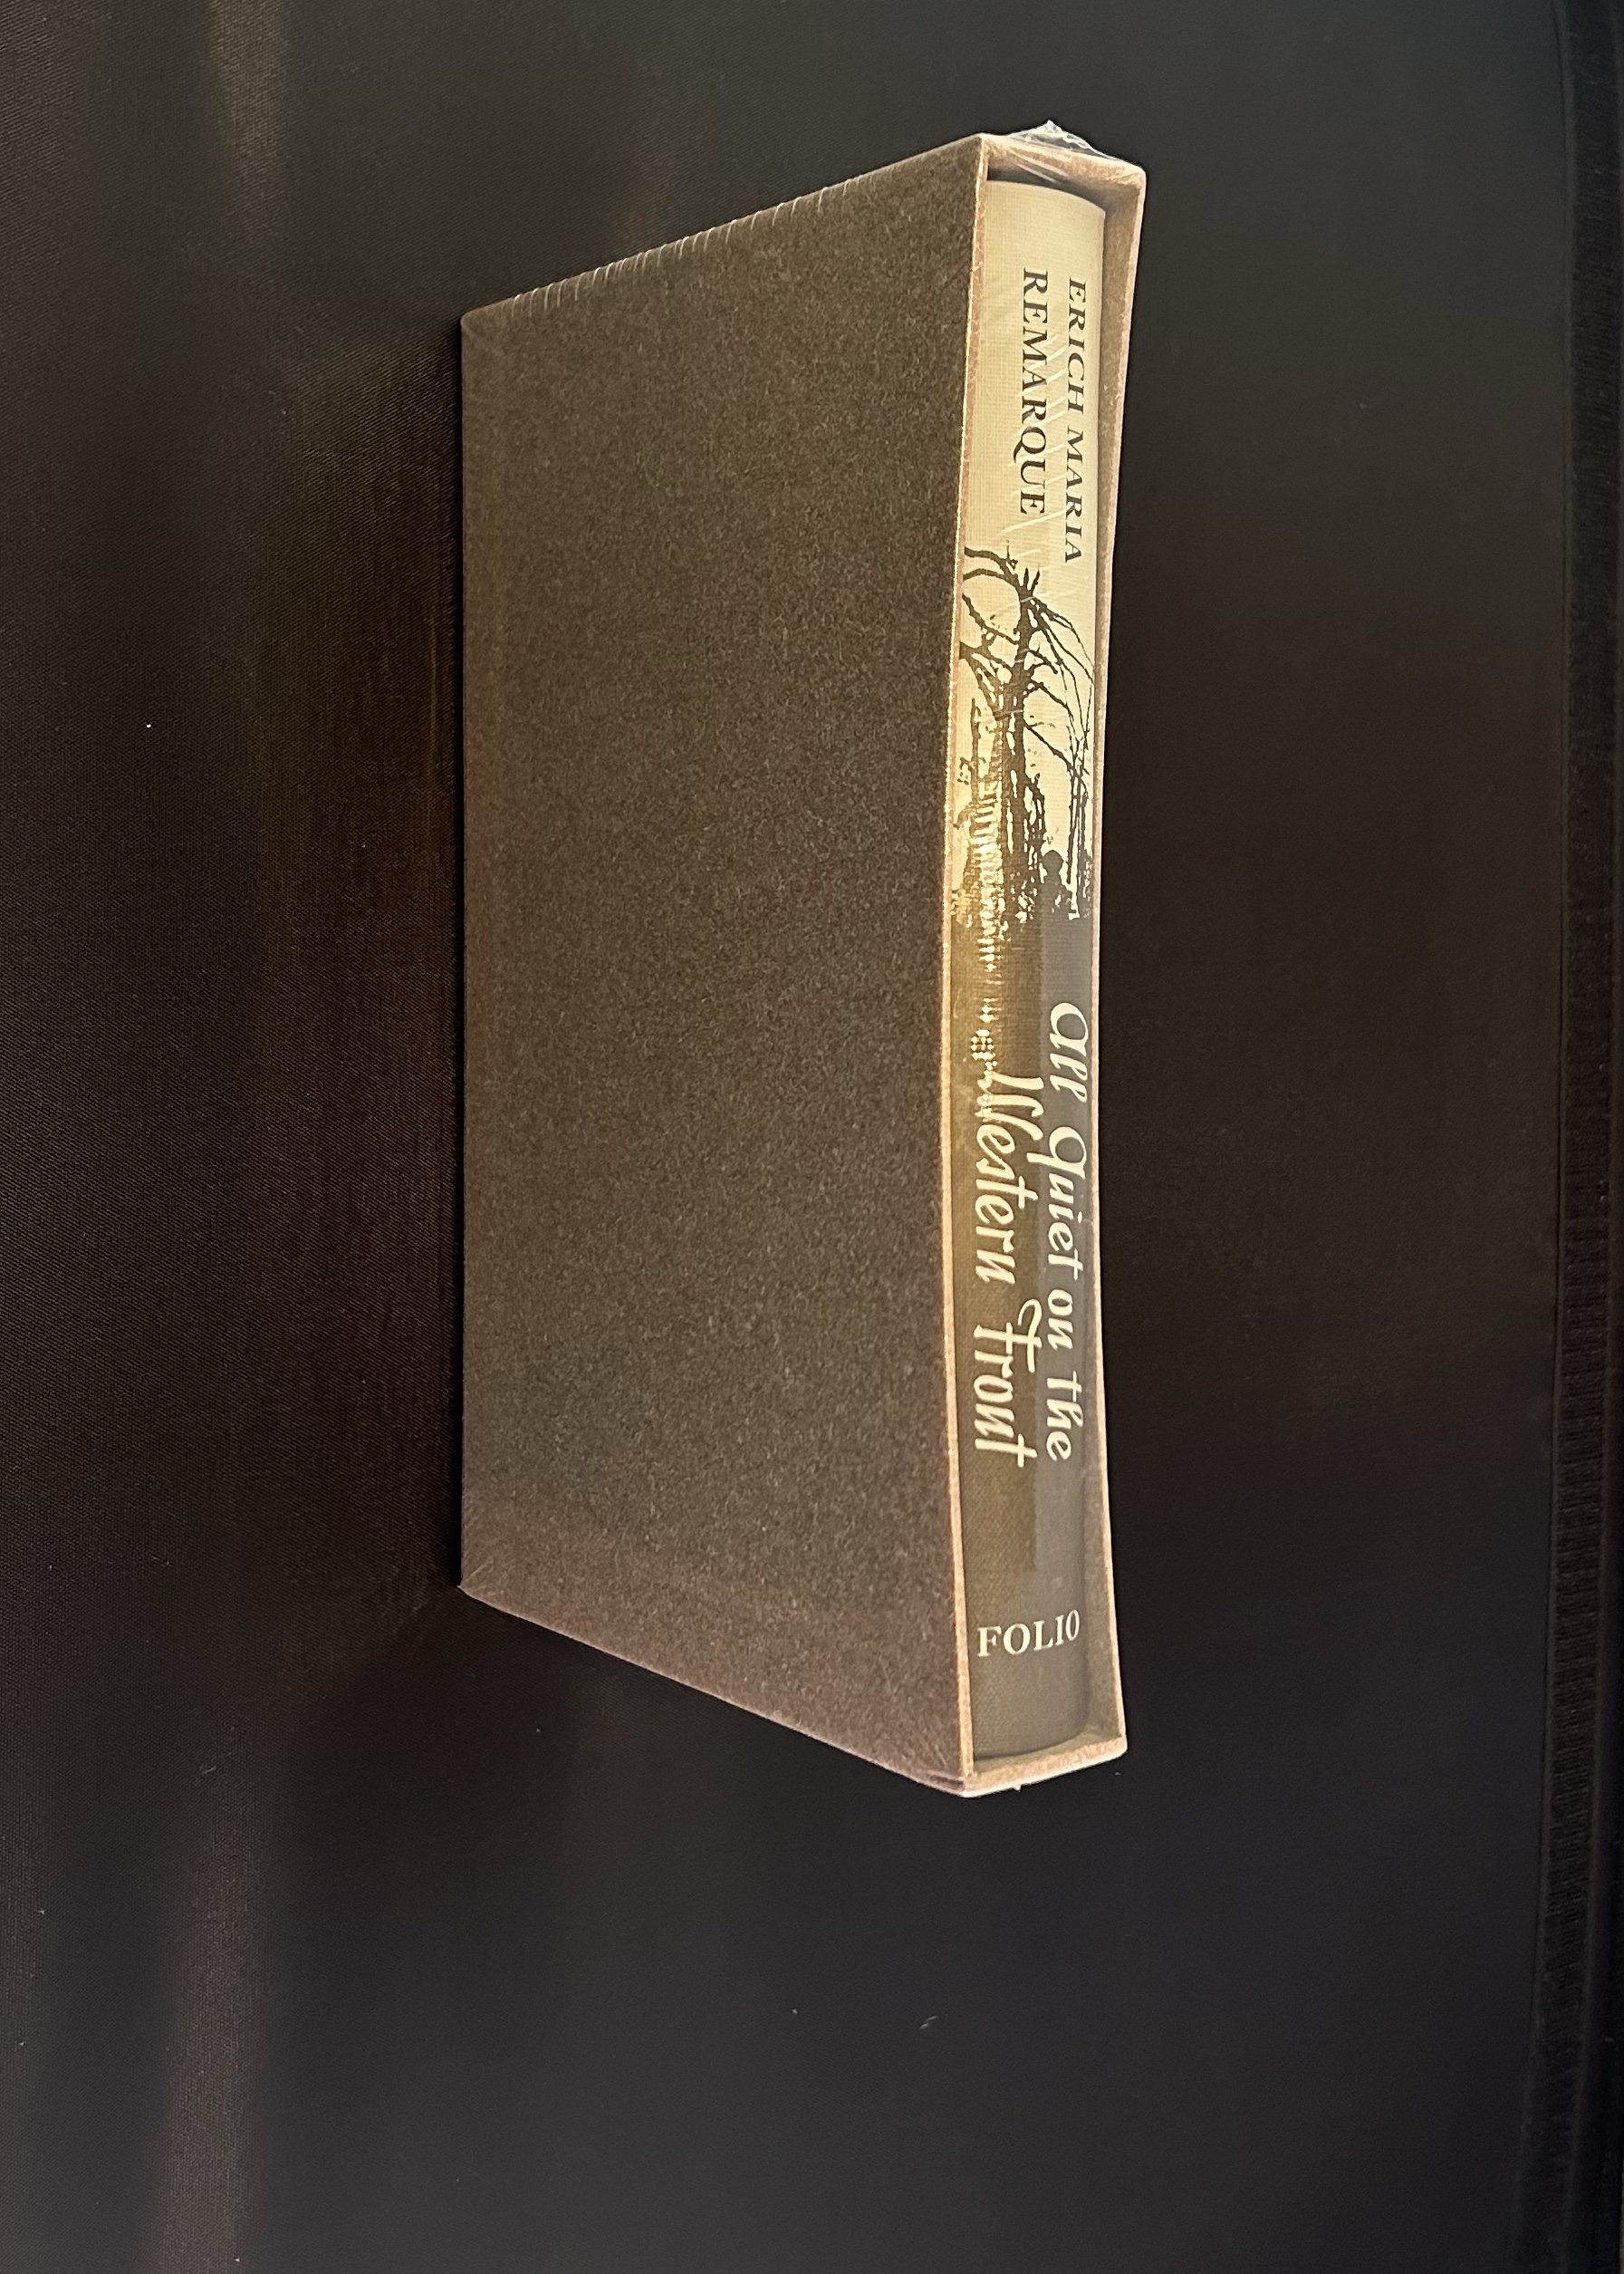 All Quiet On The Western Front - Folio Society (Sealed)